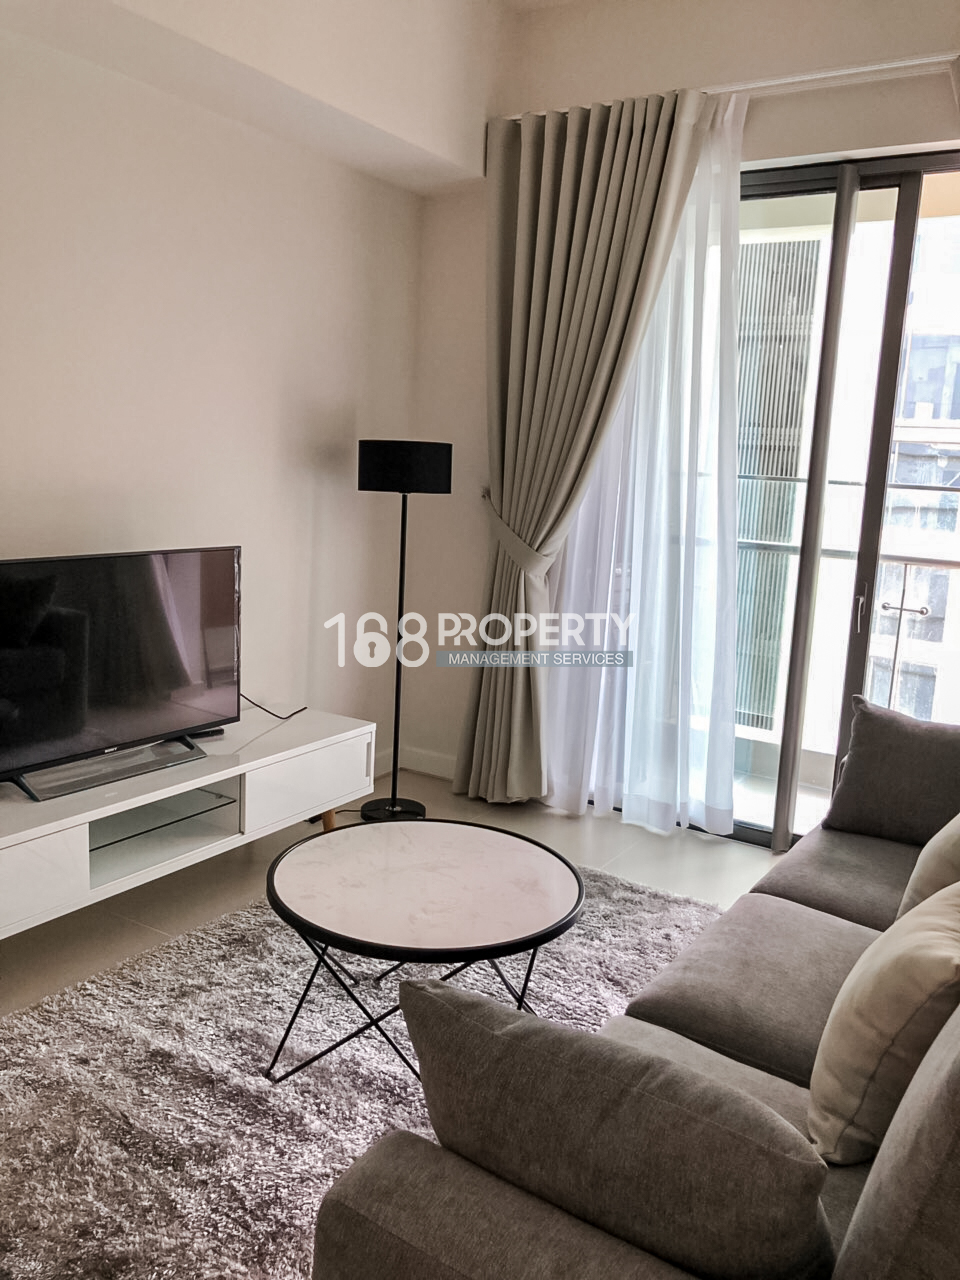 [Gateway Thao Dien] – 1BR Apartment For Rent With Modern Lifestyle In District 2